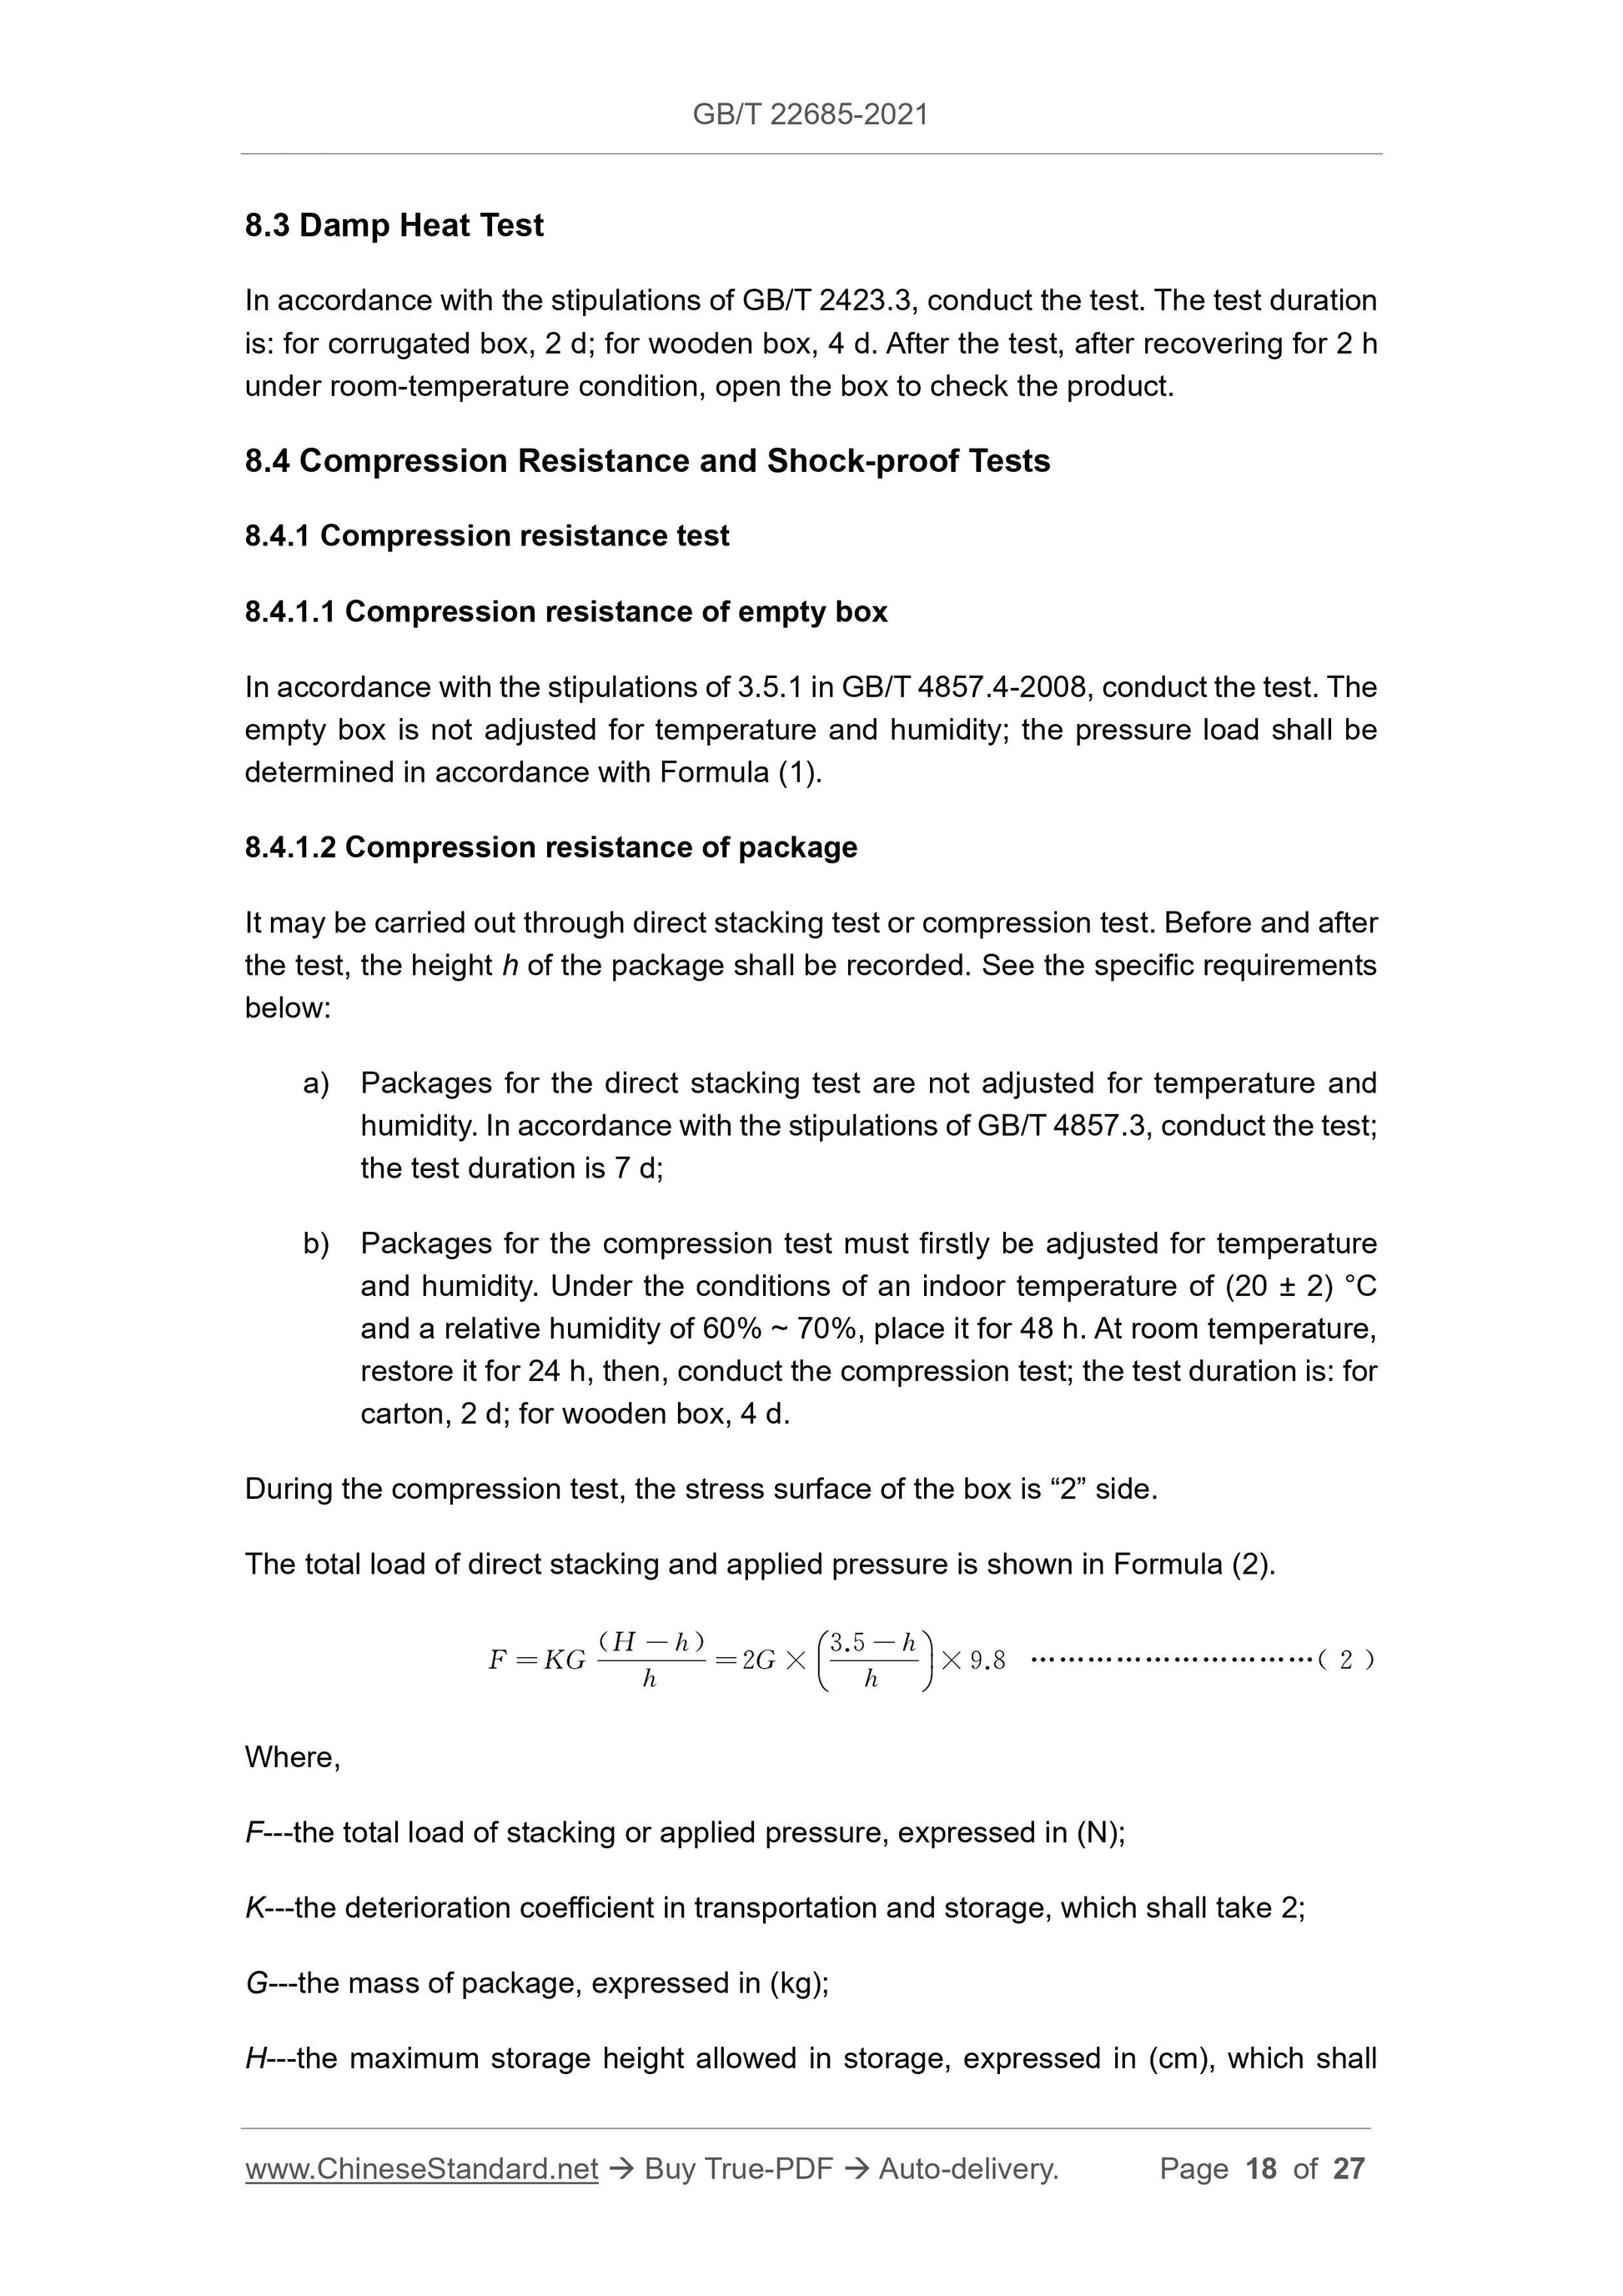 GB/T 22685-2021 Page 8